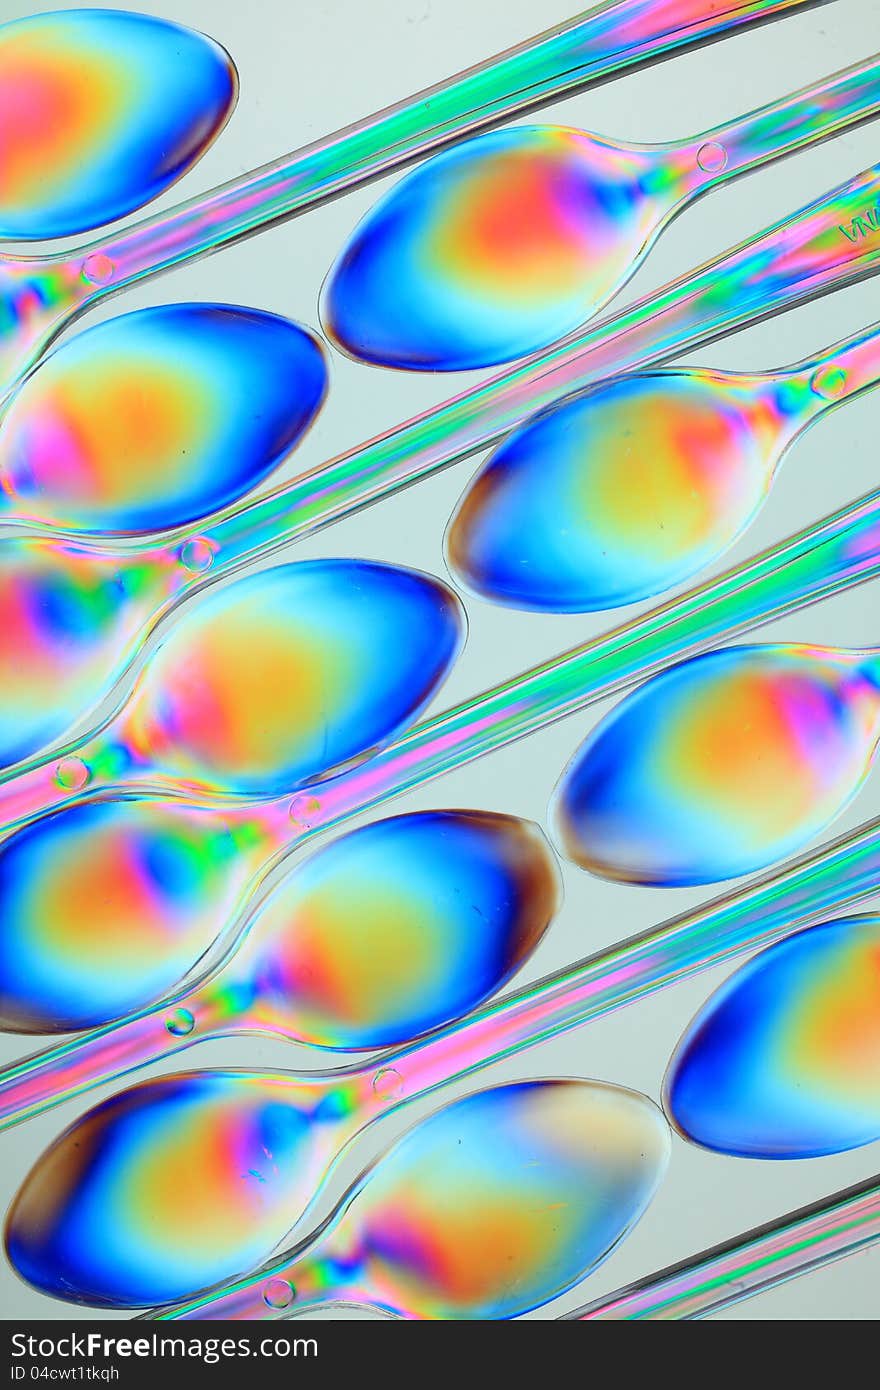 Small spoons consisting of transparent plastic seen in polarized light. Small spoons consisting of transparent plastic seen in polarized light